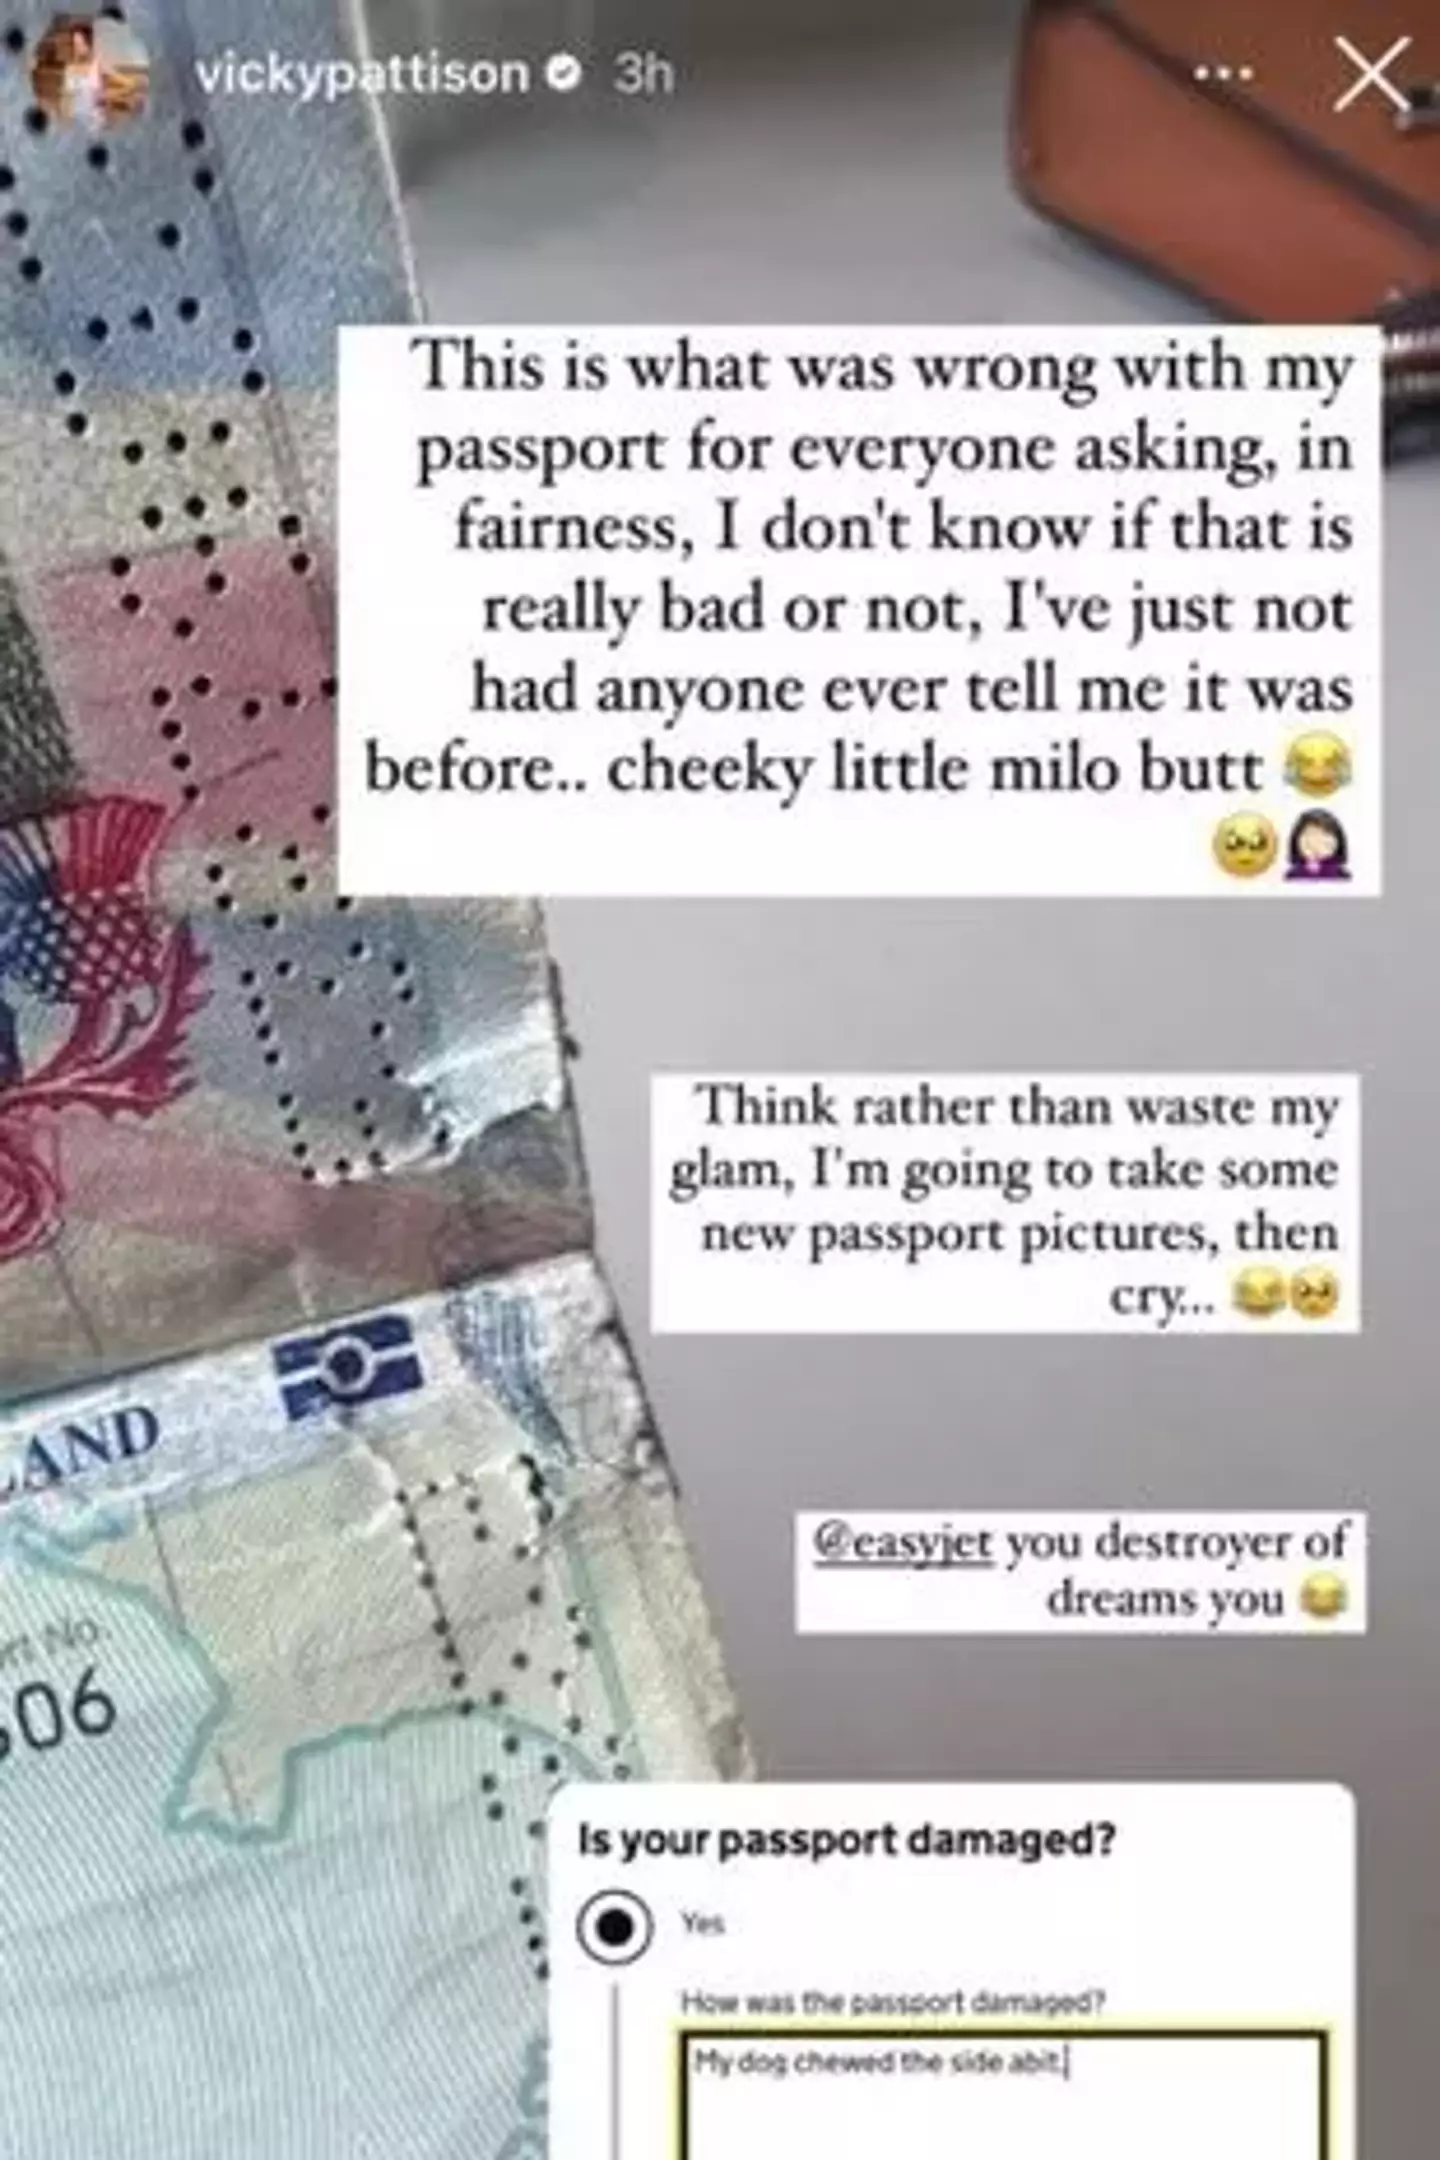 She shared a snap of her damaged passport.